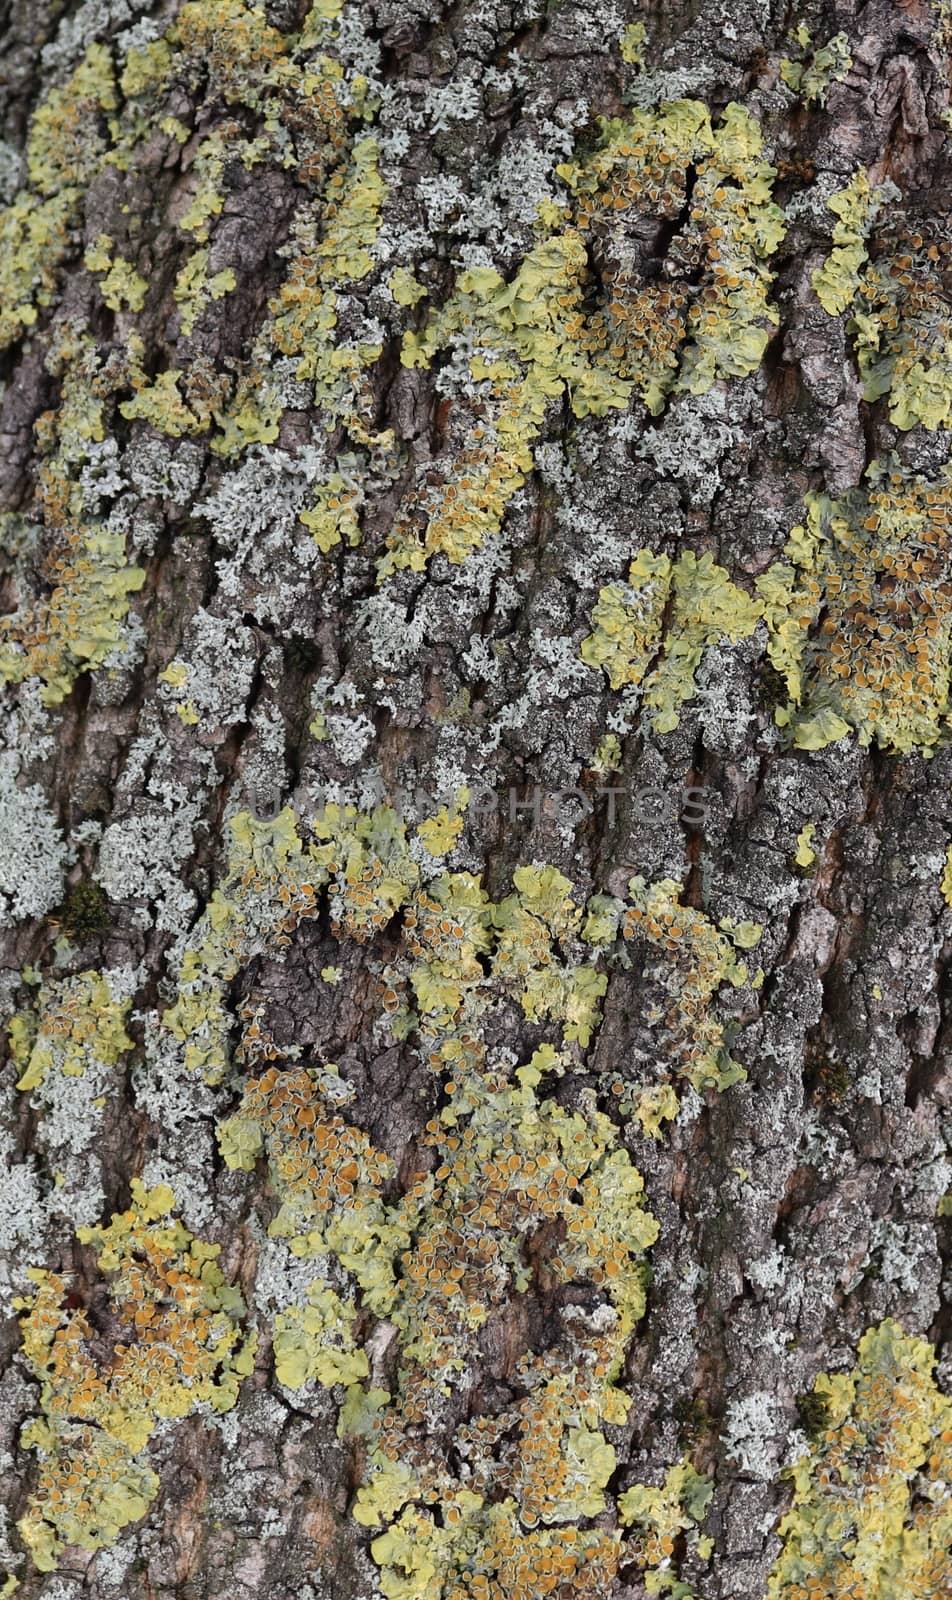 Close up view on very detailed tree bark texture in high resolution